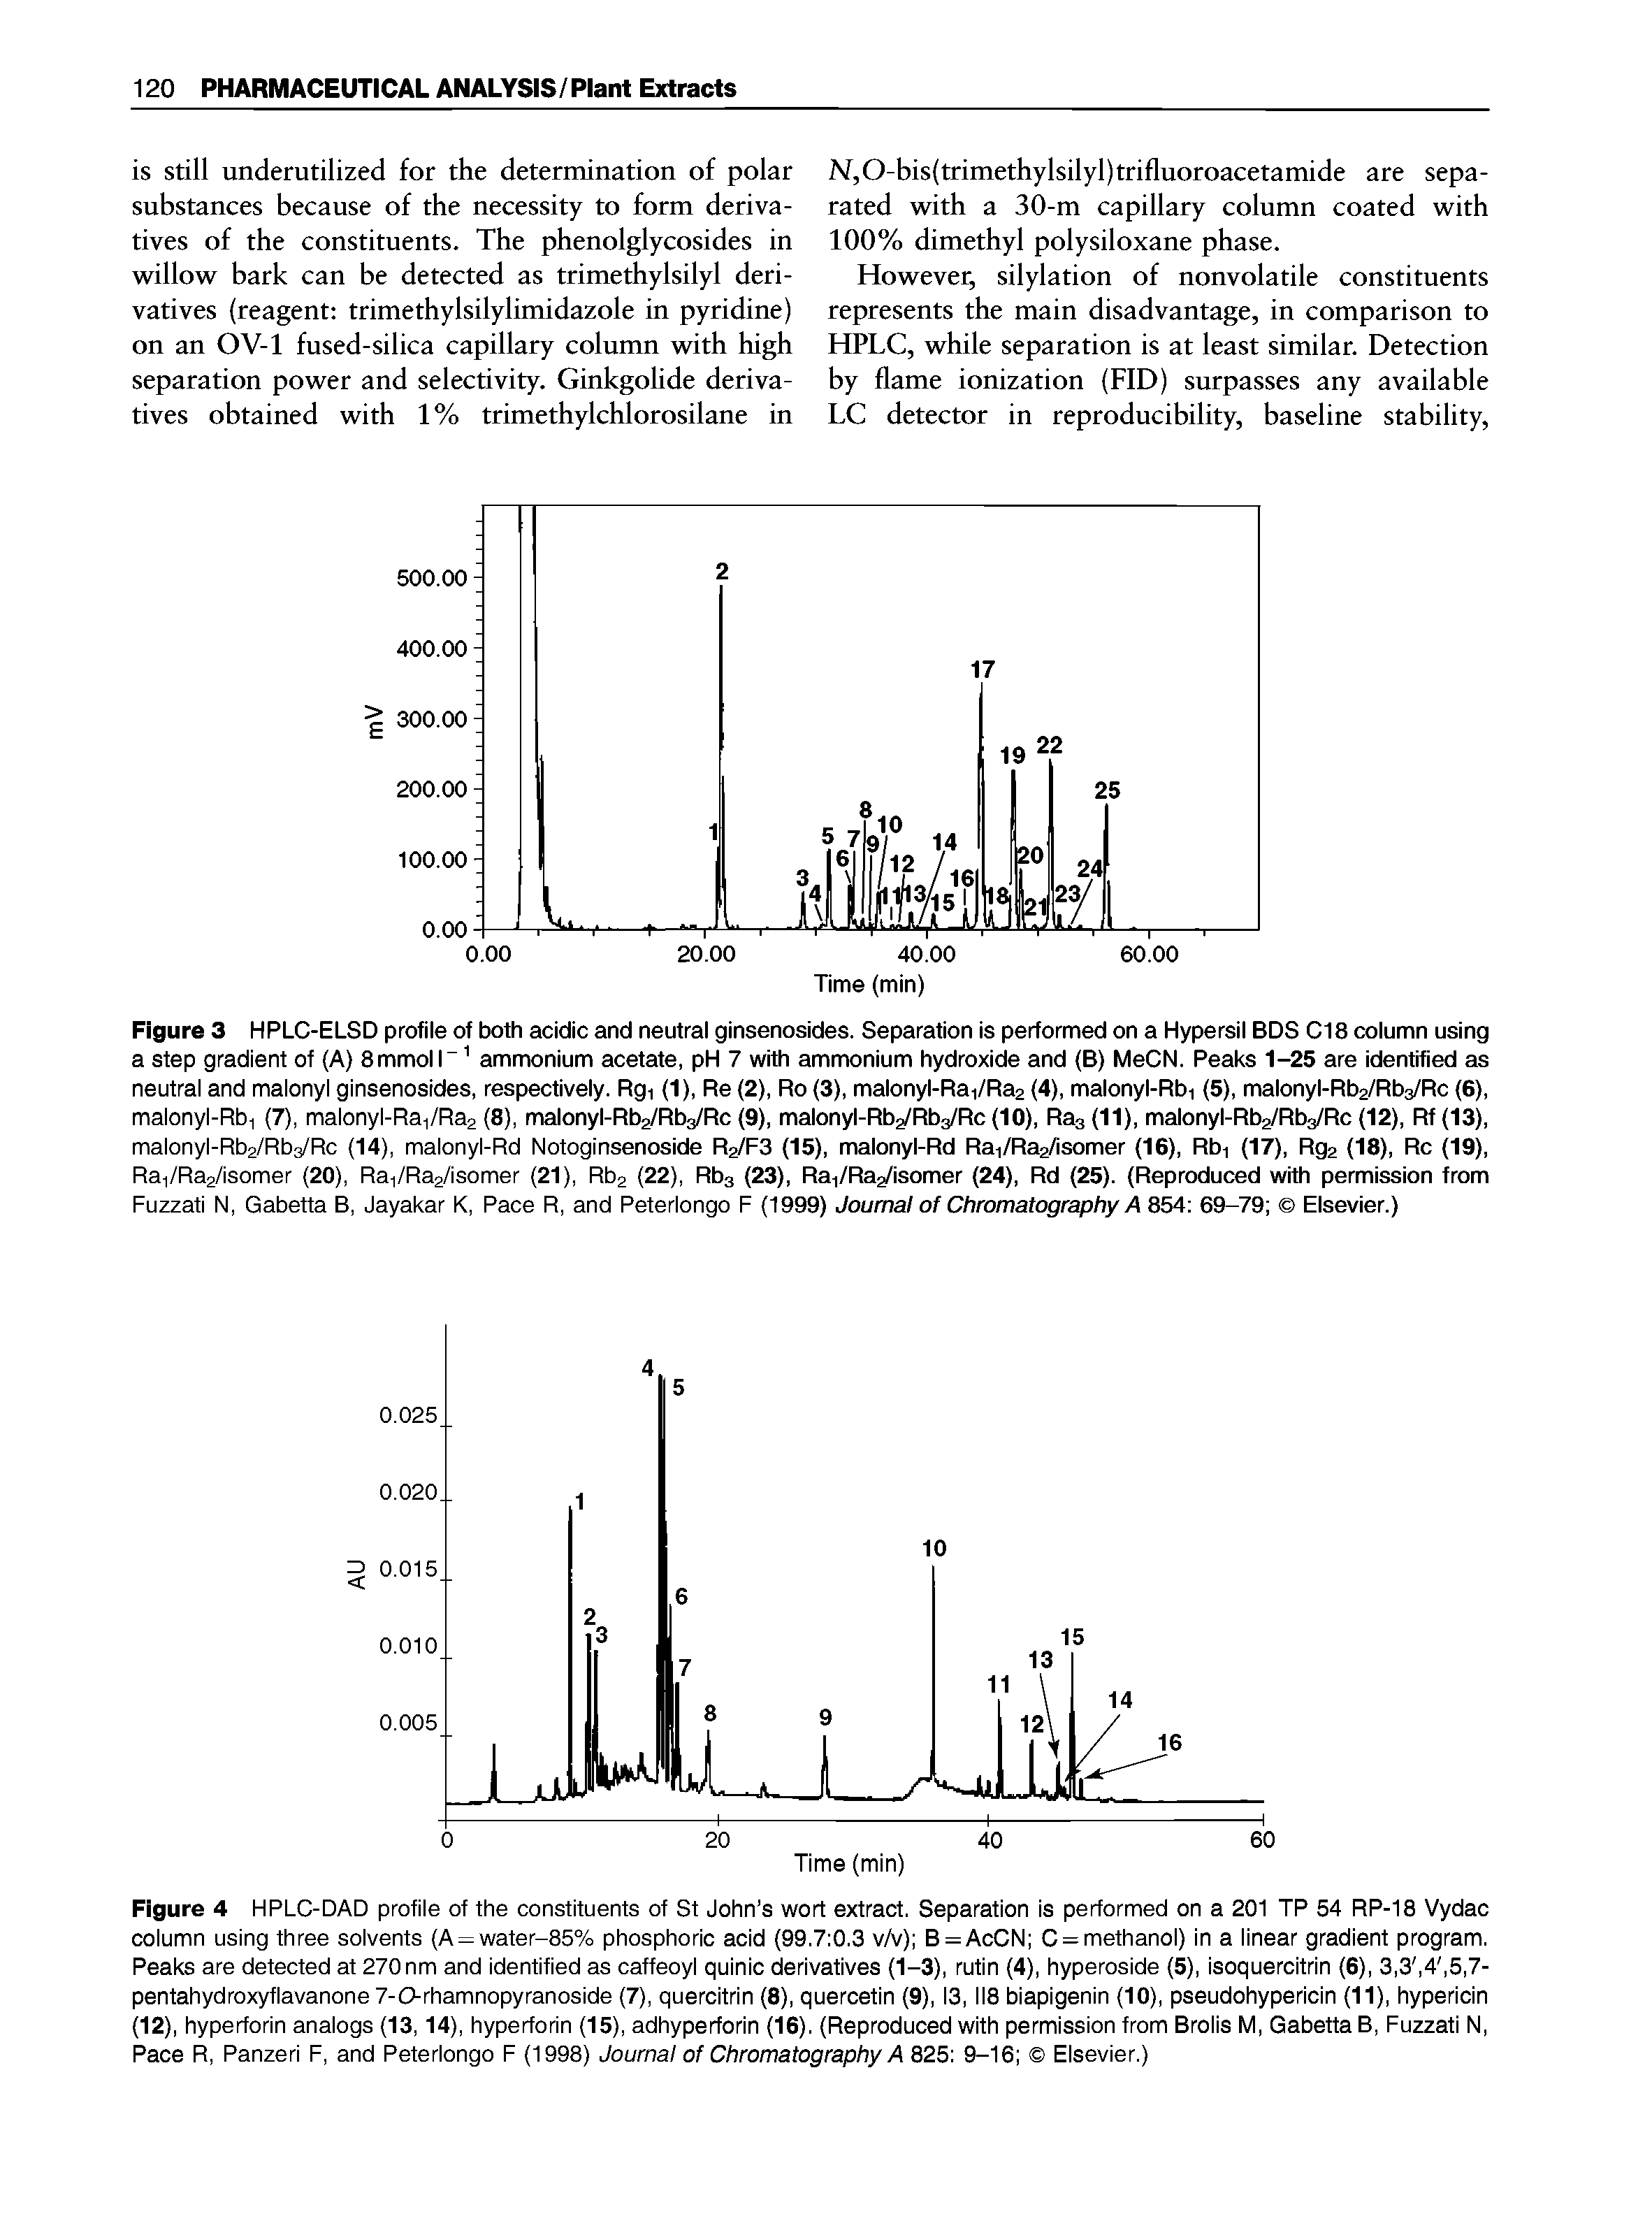 Figure 3 HPLC-ELSD profile of both acidic and neutral ginsenosides. Separation is performed on a Hypersil BDS CIS column using a step gradient of (A) 8 mmol 1 ammonium acetate, pH 7 with ammonium hydroxide and (B) MeCN. Peaks 1-25 are identified as neutral and malonyl ginsenosides, respectively. Rg, (1), Re (2), Ro (3), malonyl-Rai/Raa (4), malonyl-Rbi (5), malonyl-Rba/Rbs/Rc (6), malonyl-Rbi (7), malonyl-Rai/Raa (8), malonyl-Rba/Rbs/Rc (9), malonyl-Rbs/Rbs/Rc (10), Rag (11), malonyl-Rba/RlVRc (12), Rf (13), malonyl-Rba/Rbs/Rc (14), malonyl-Rd Notoginsenoside R2/F3 (15), malonyl-Rd Rai/Raa/isomer (16), Rbi (17), Rga (18), Rc (19), Rai/Raa/isomer (20), Rai/Raa/isomer (21), Rba (22), Rbs (23), Rai/Raa/isomer (24), Rd (25). (Reproduced with permission from Fuzzati N, Gabetta B, Jayakar K, Pace R, and Peterlongo F (1999) Journal of Chromatography A 854 69-79 Elsevier.)...